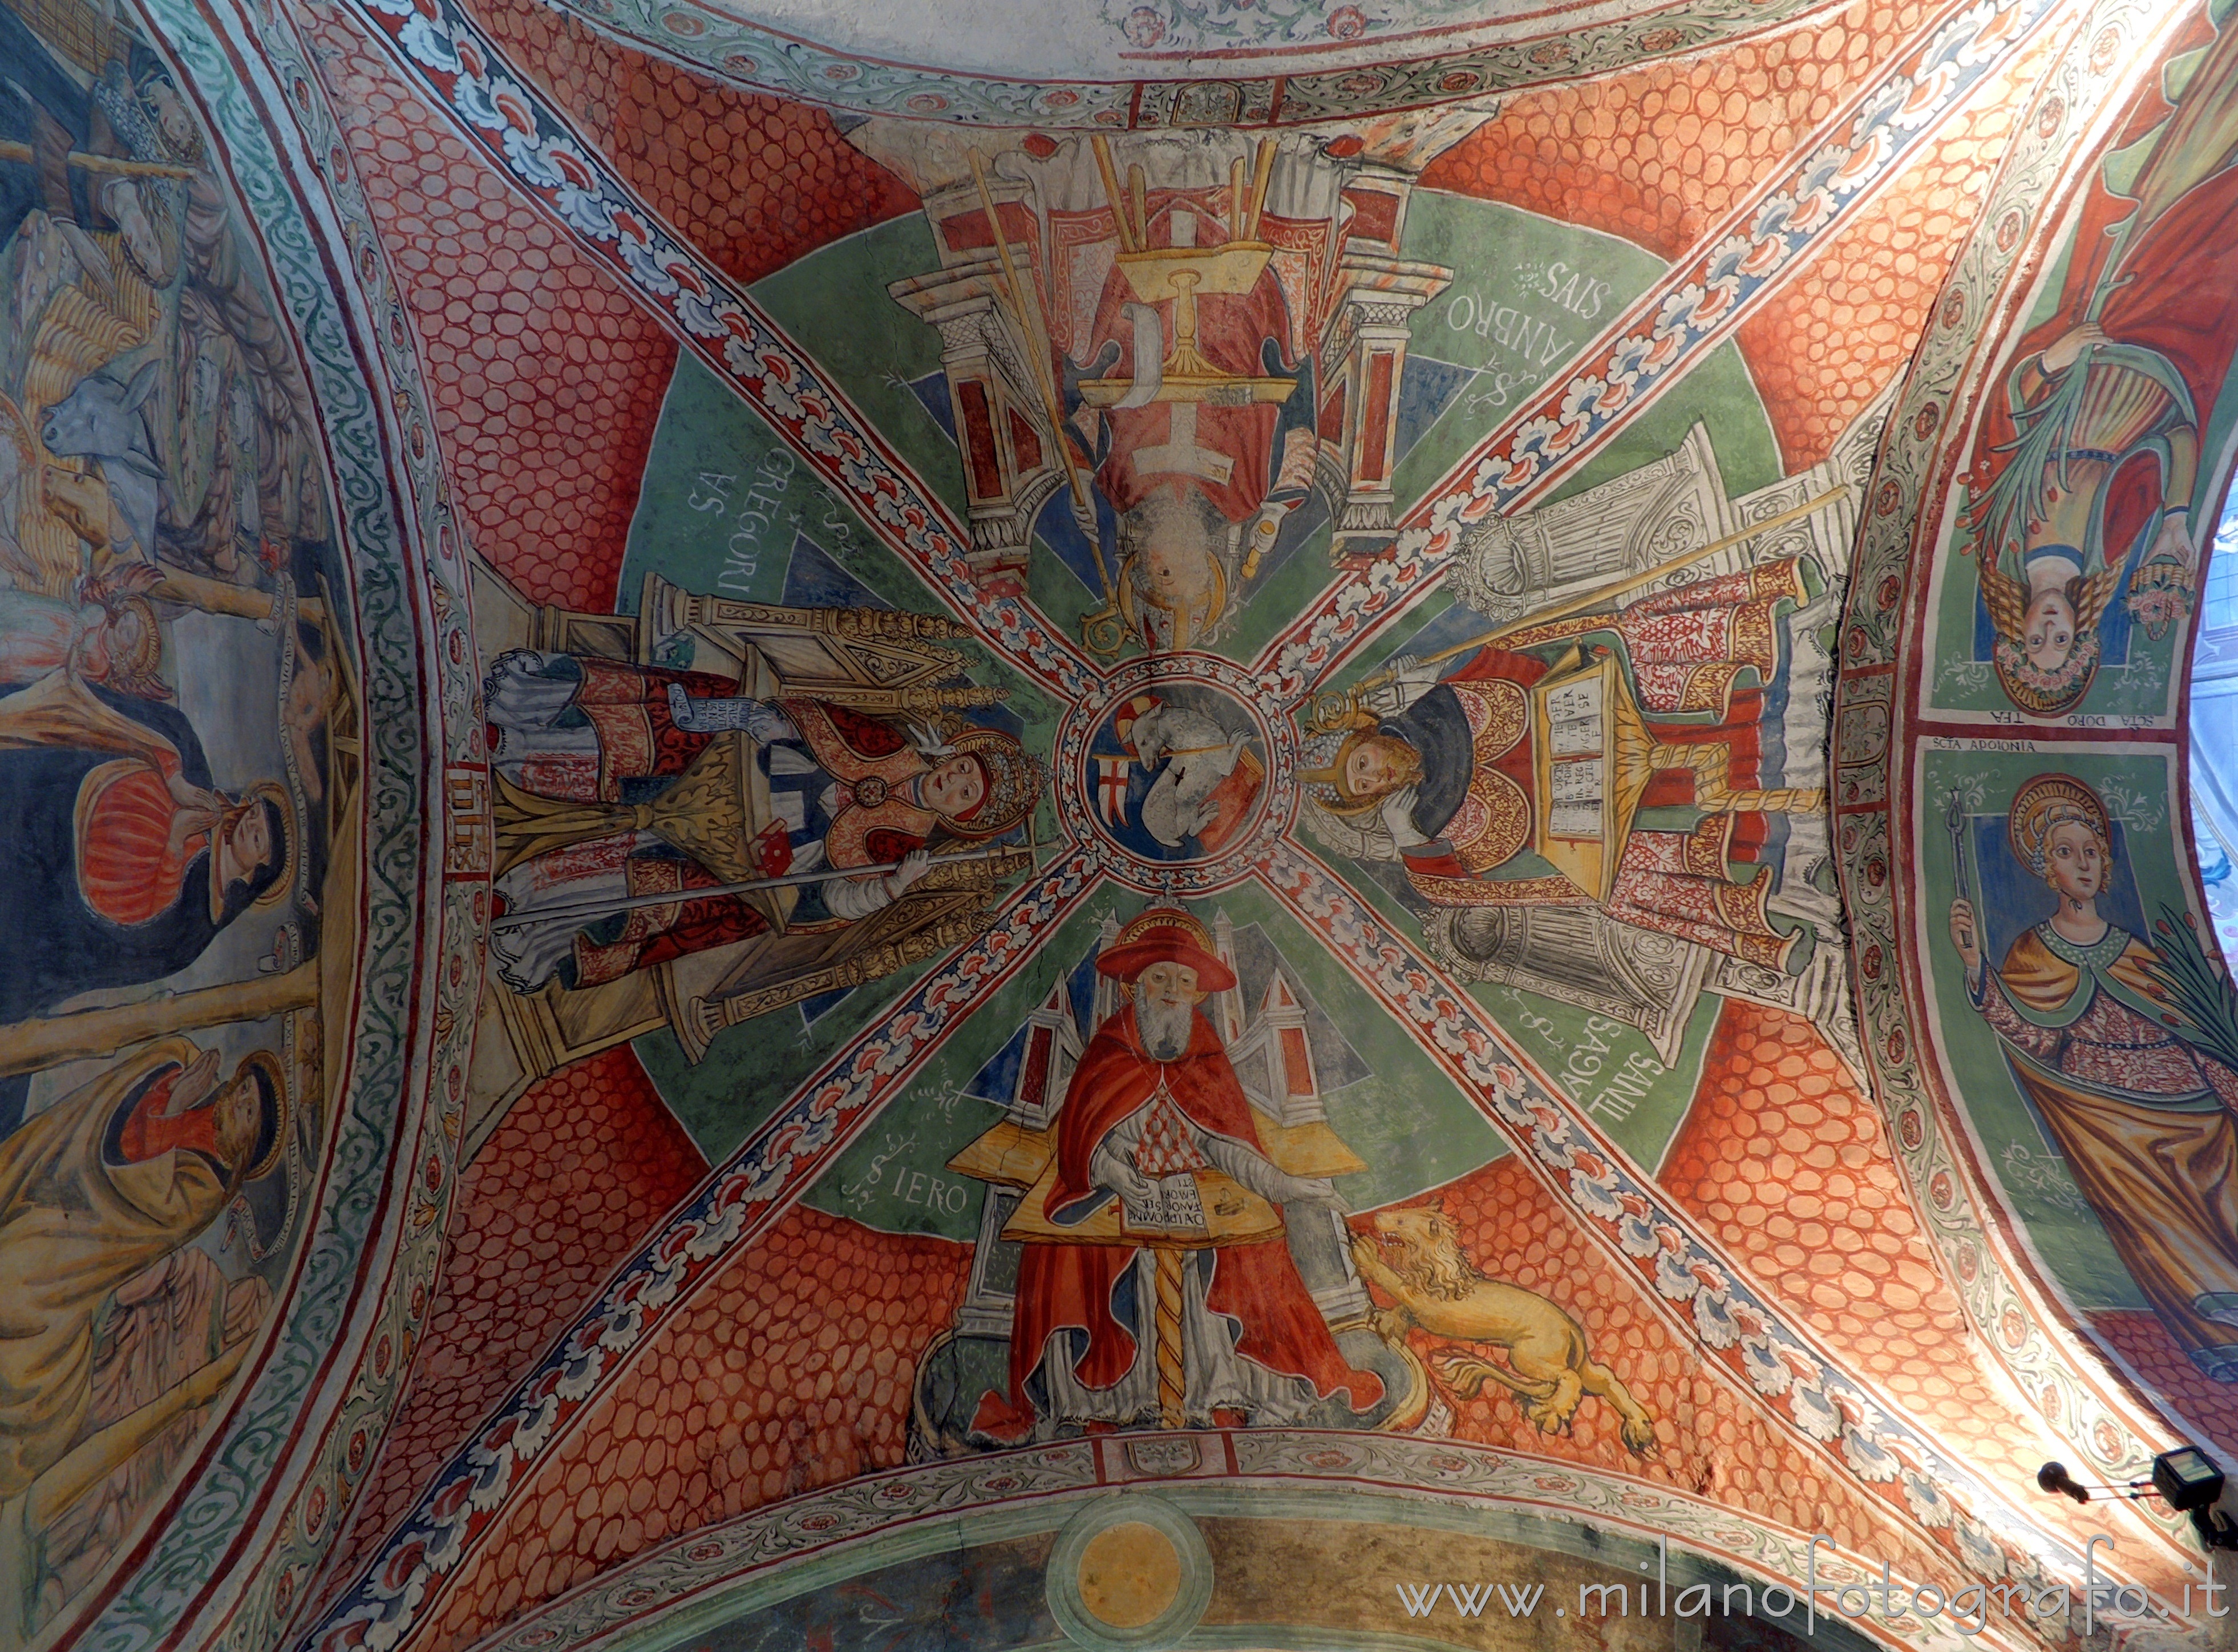 Orta San Giulio (Novara, Italy): Doctors of the Church on the vault of the third right span of the Basilica of San Giulio - Orta San Giulio (Novara, Italy)